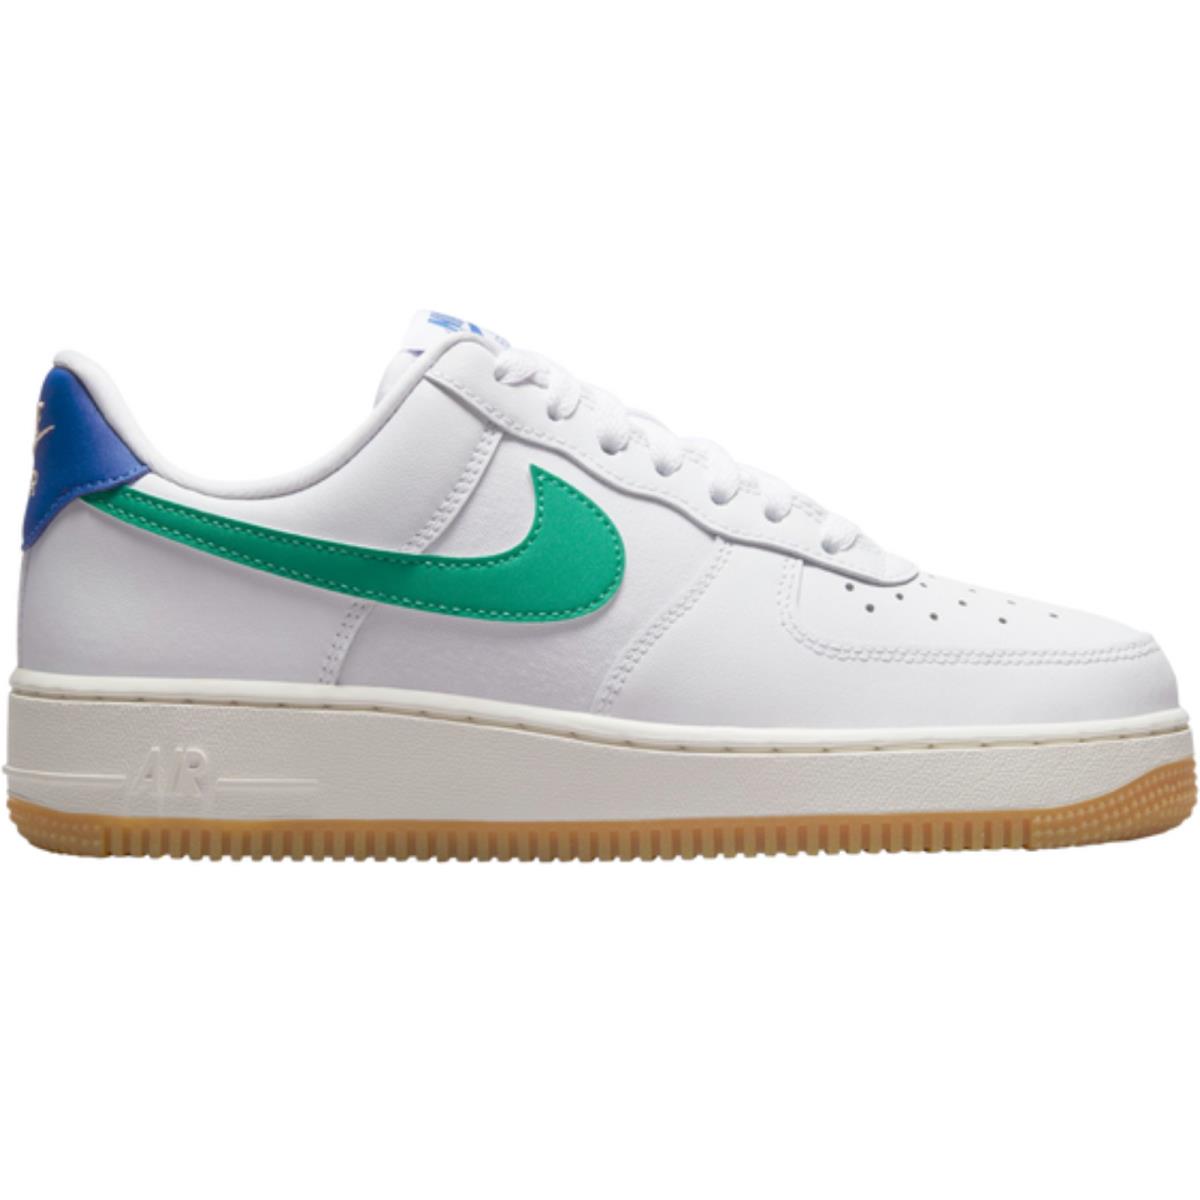 Nike Air Force 1 Women`s Casual Shoes All Colors US Sizes 6-11 White/Game Royal/Sanddrift/Stadium Green